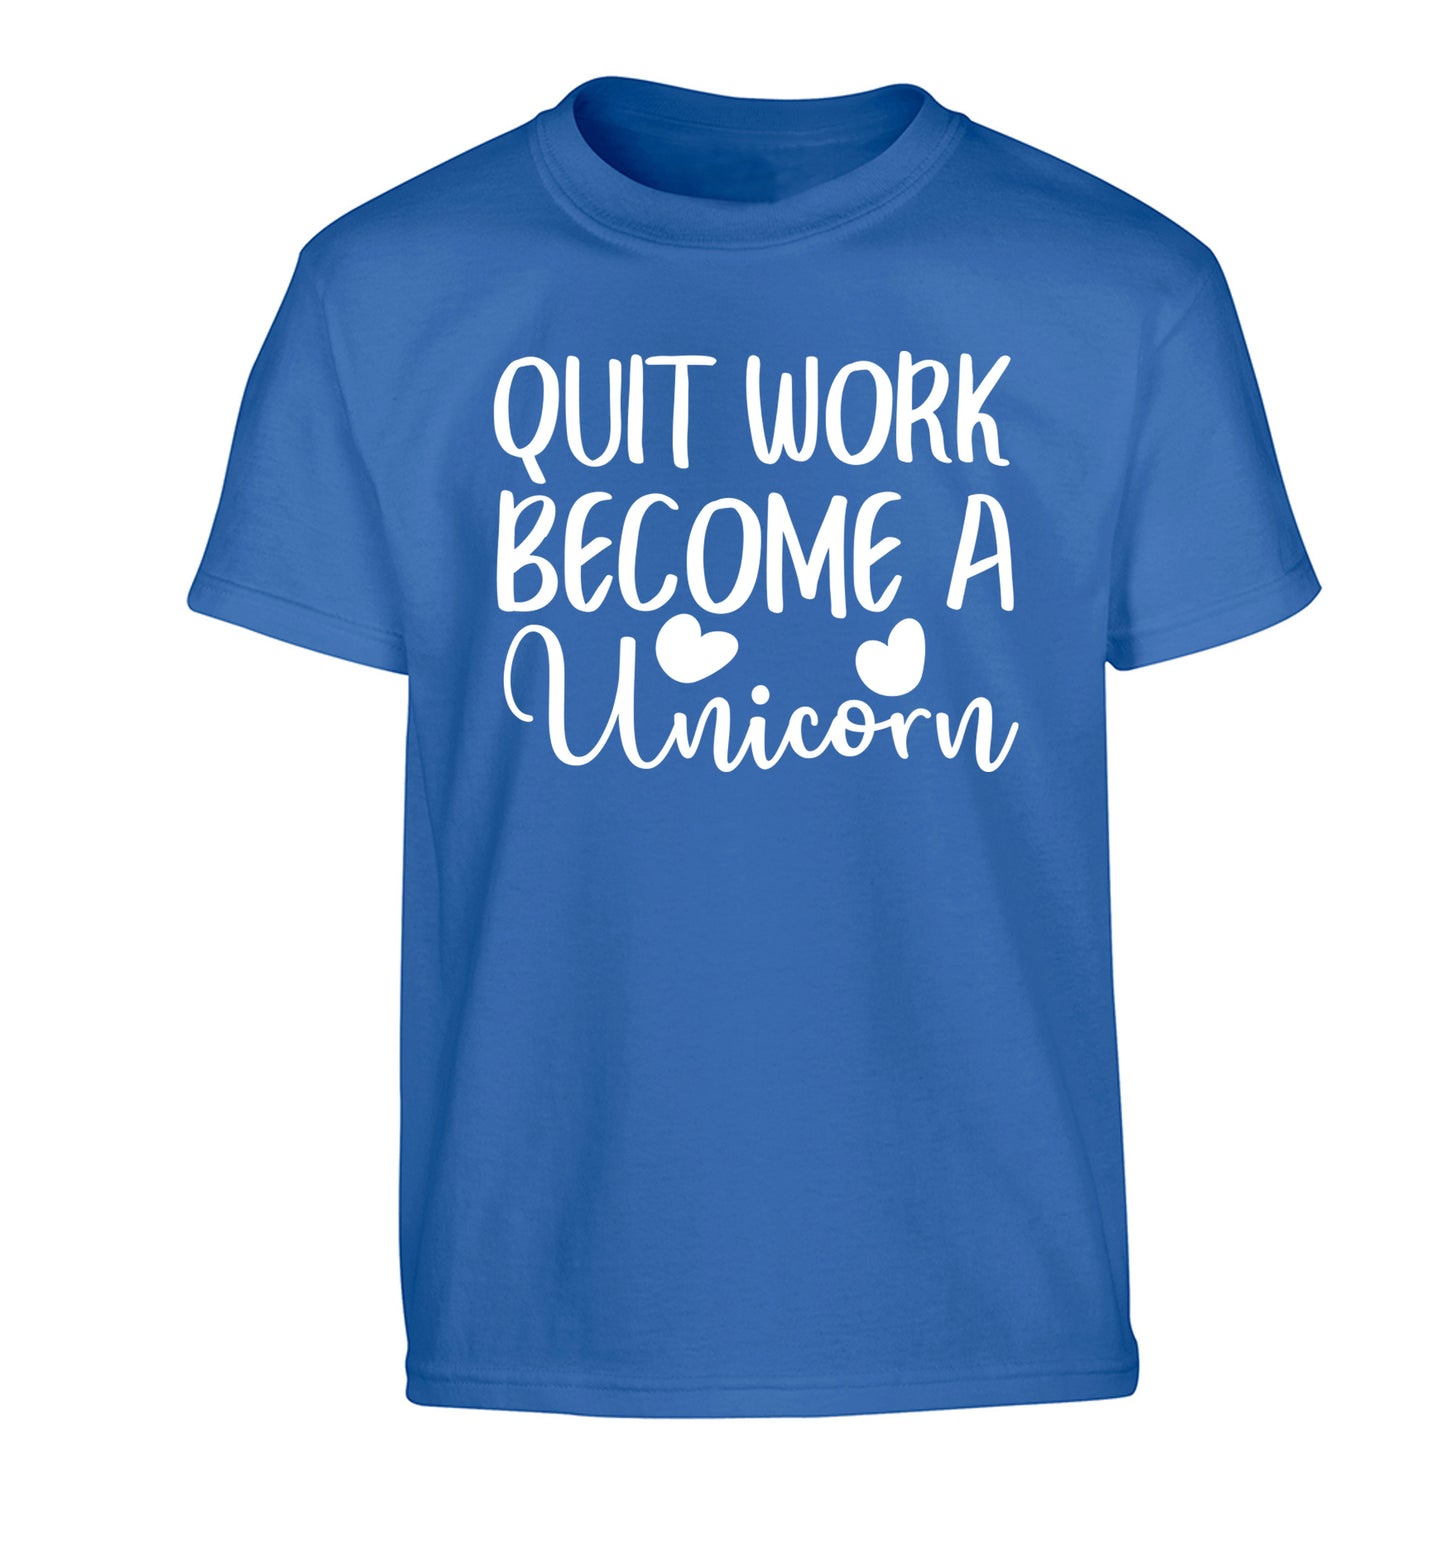 Quit work become a unicorn Children's blue Tshirt 12-13 Years